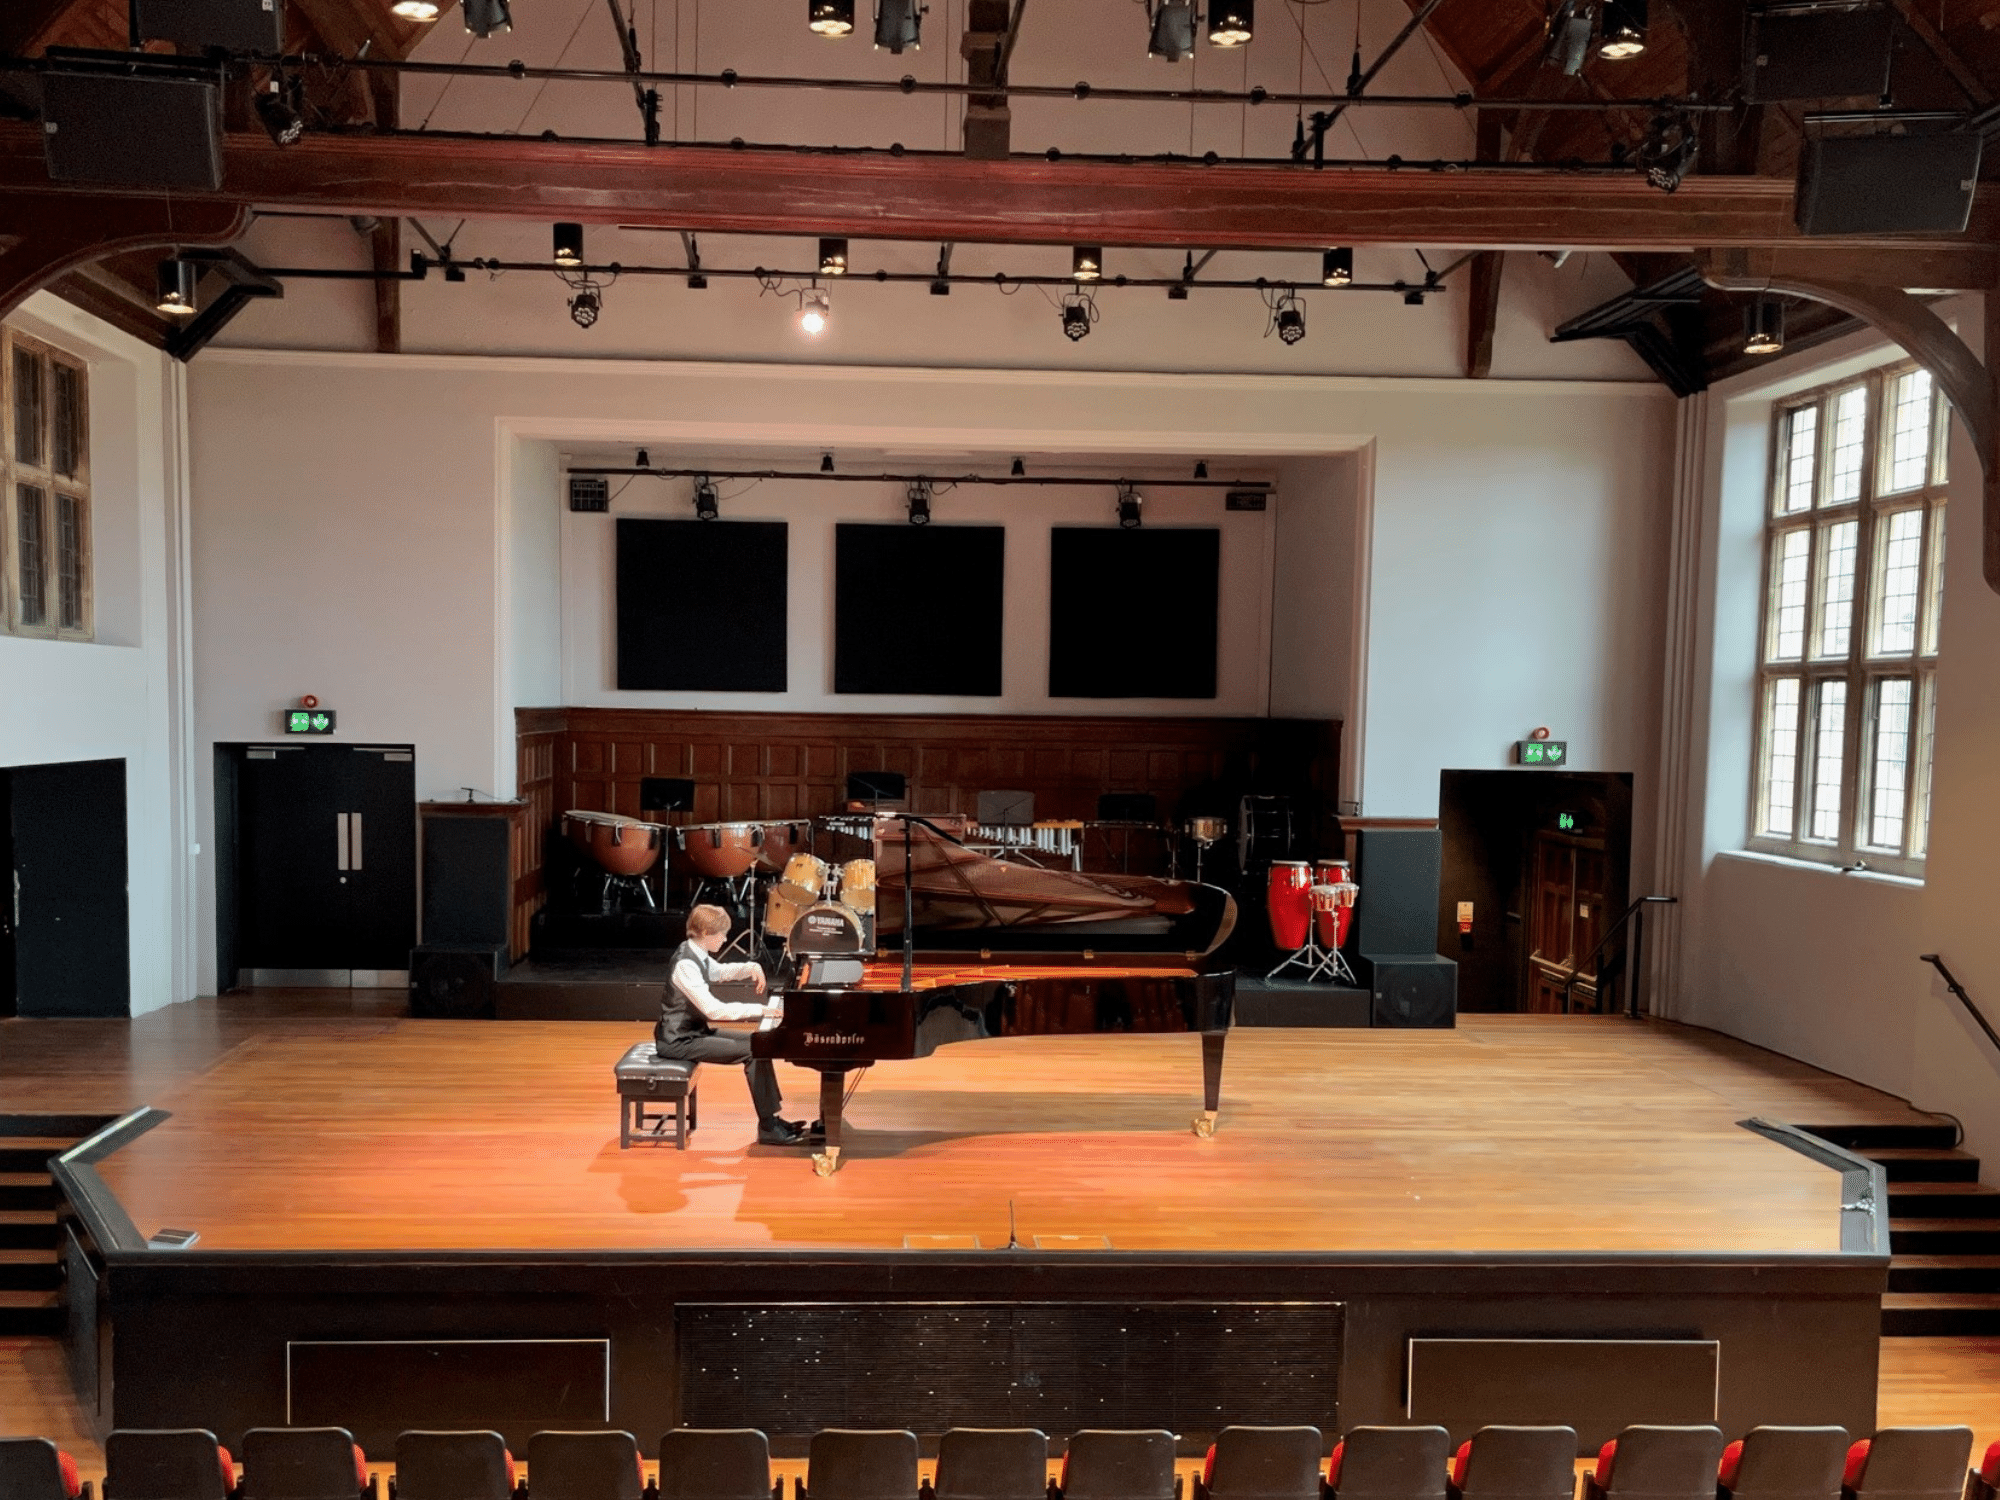 Student plays grand piano on stage in concert hall